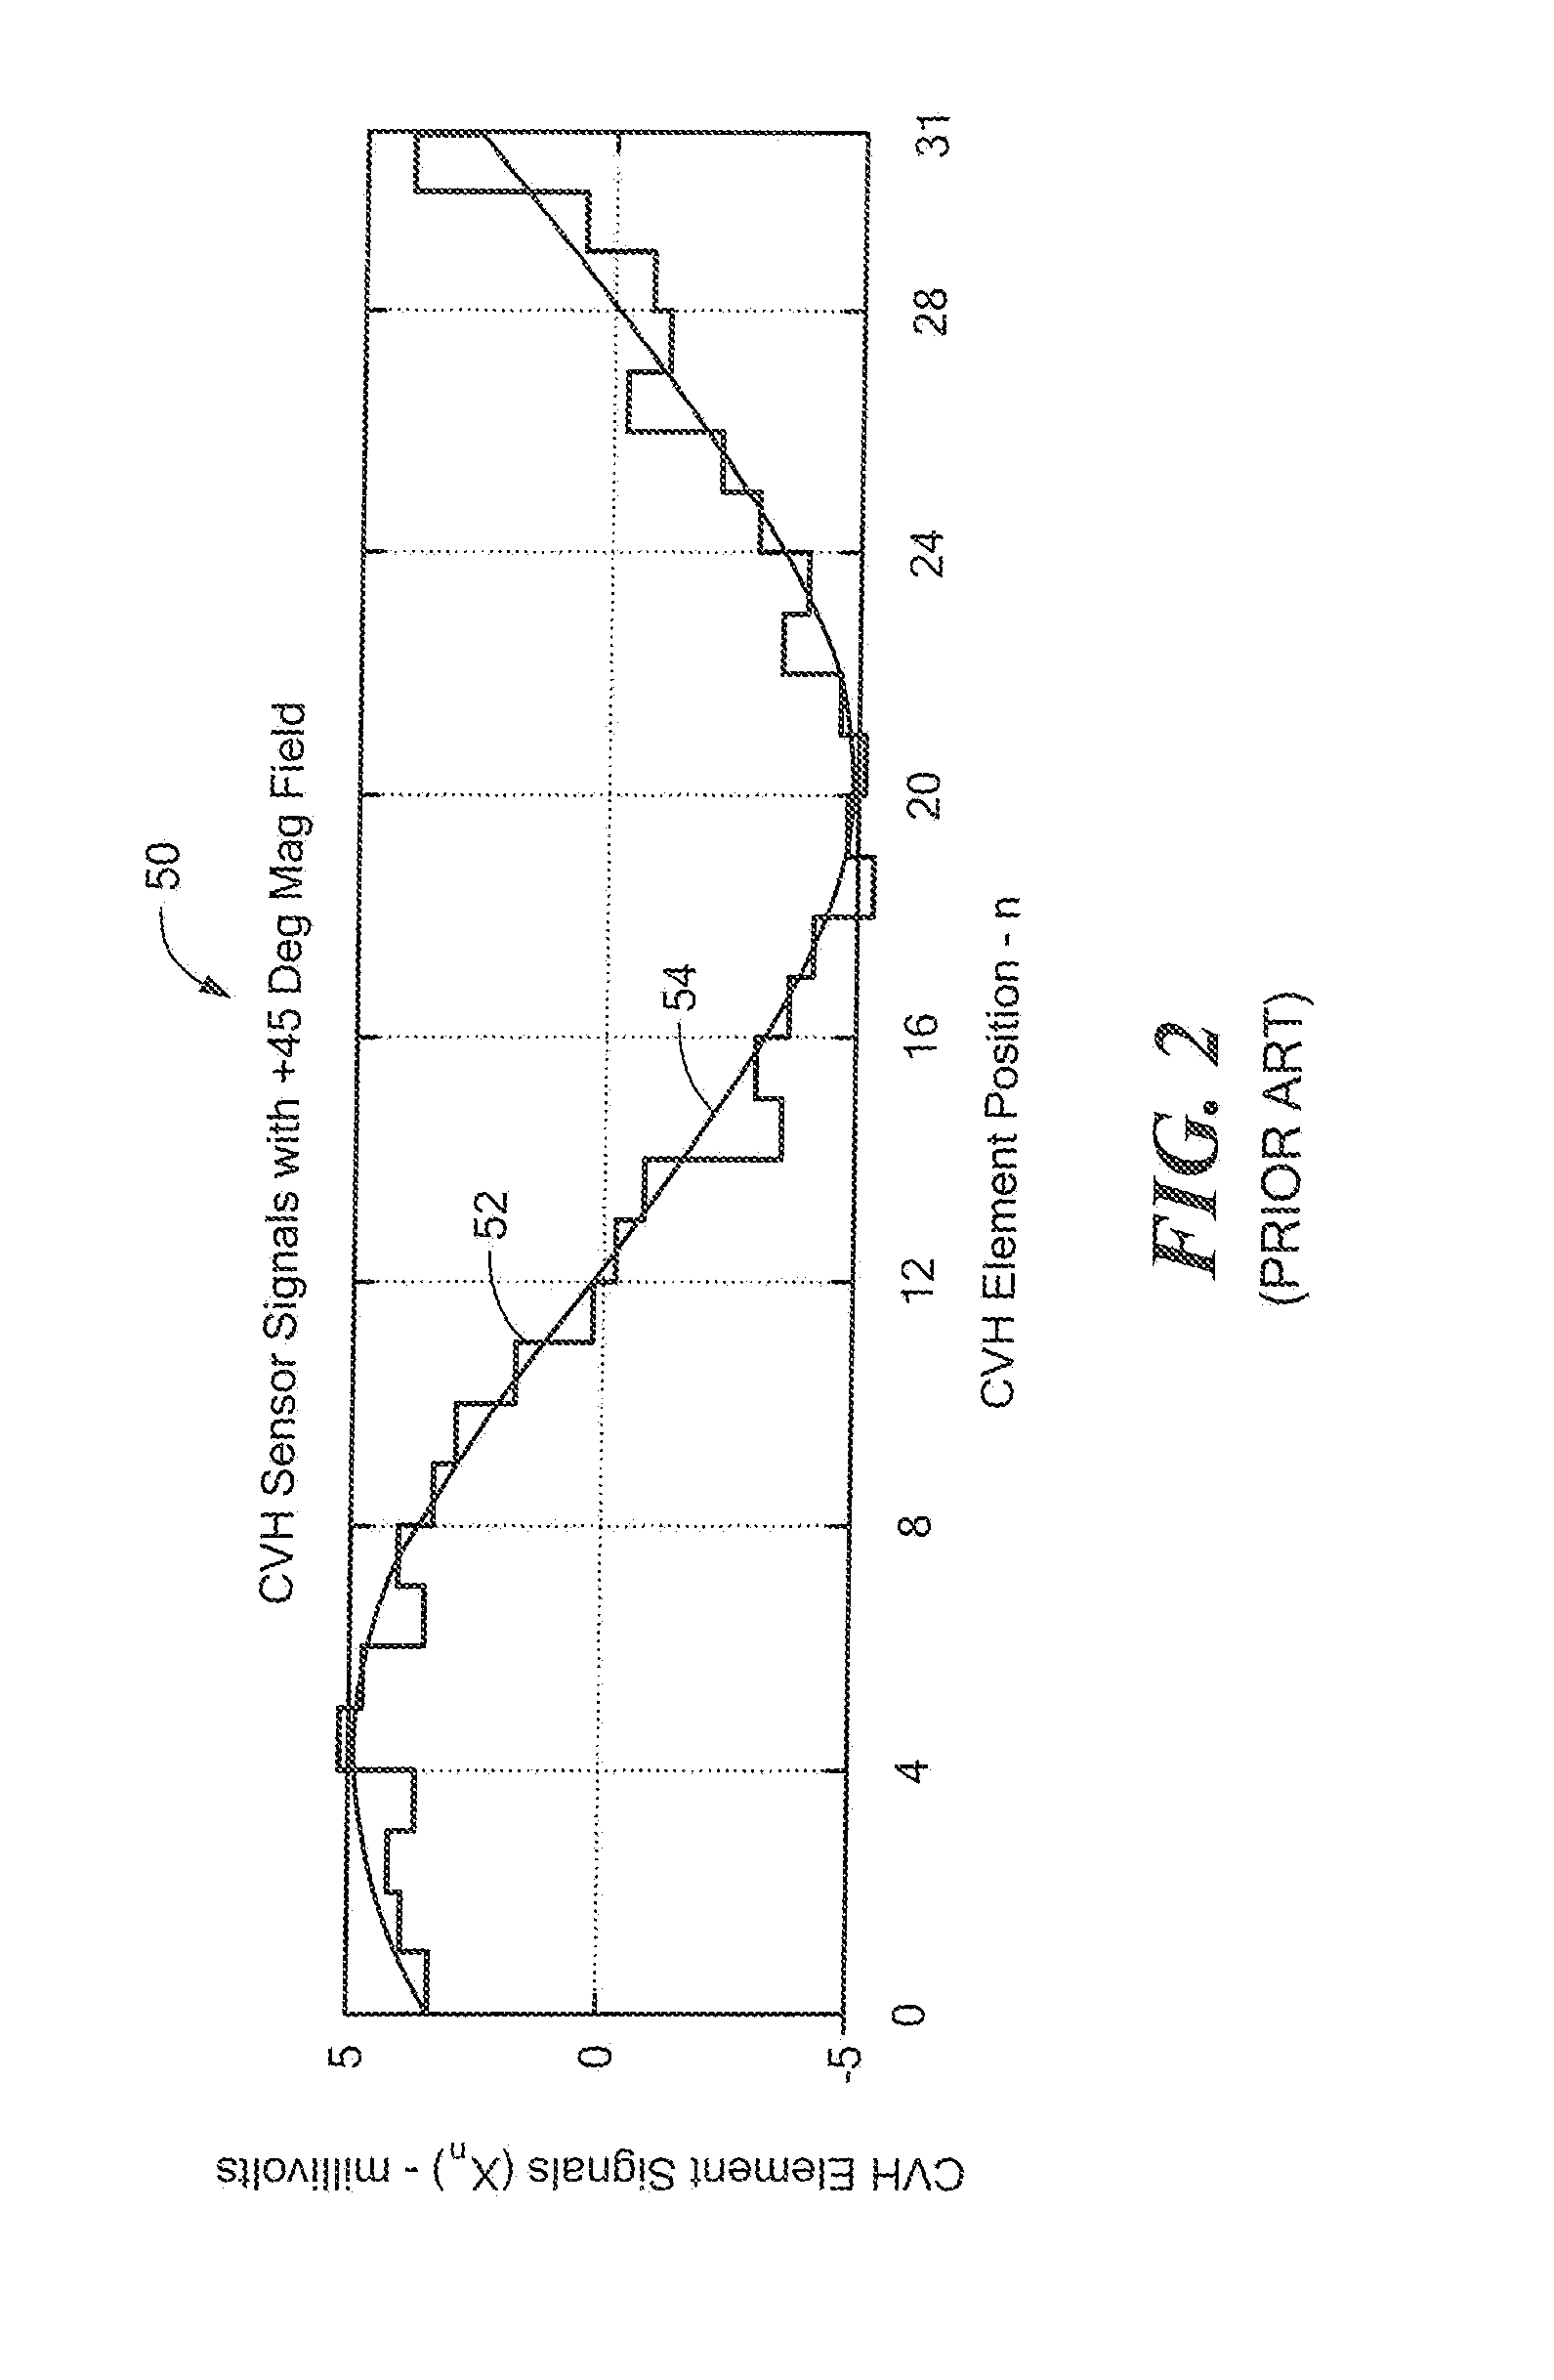 Magnetic Field Sensor and Related Techniques That Inject An Error Correction Signal Into a Signal Channel To Result In Reduced Error